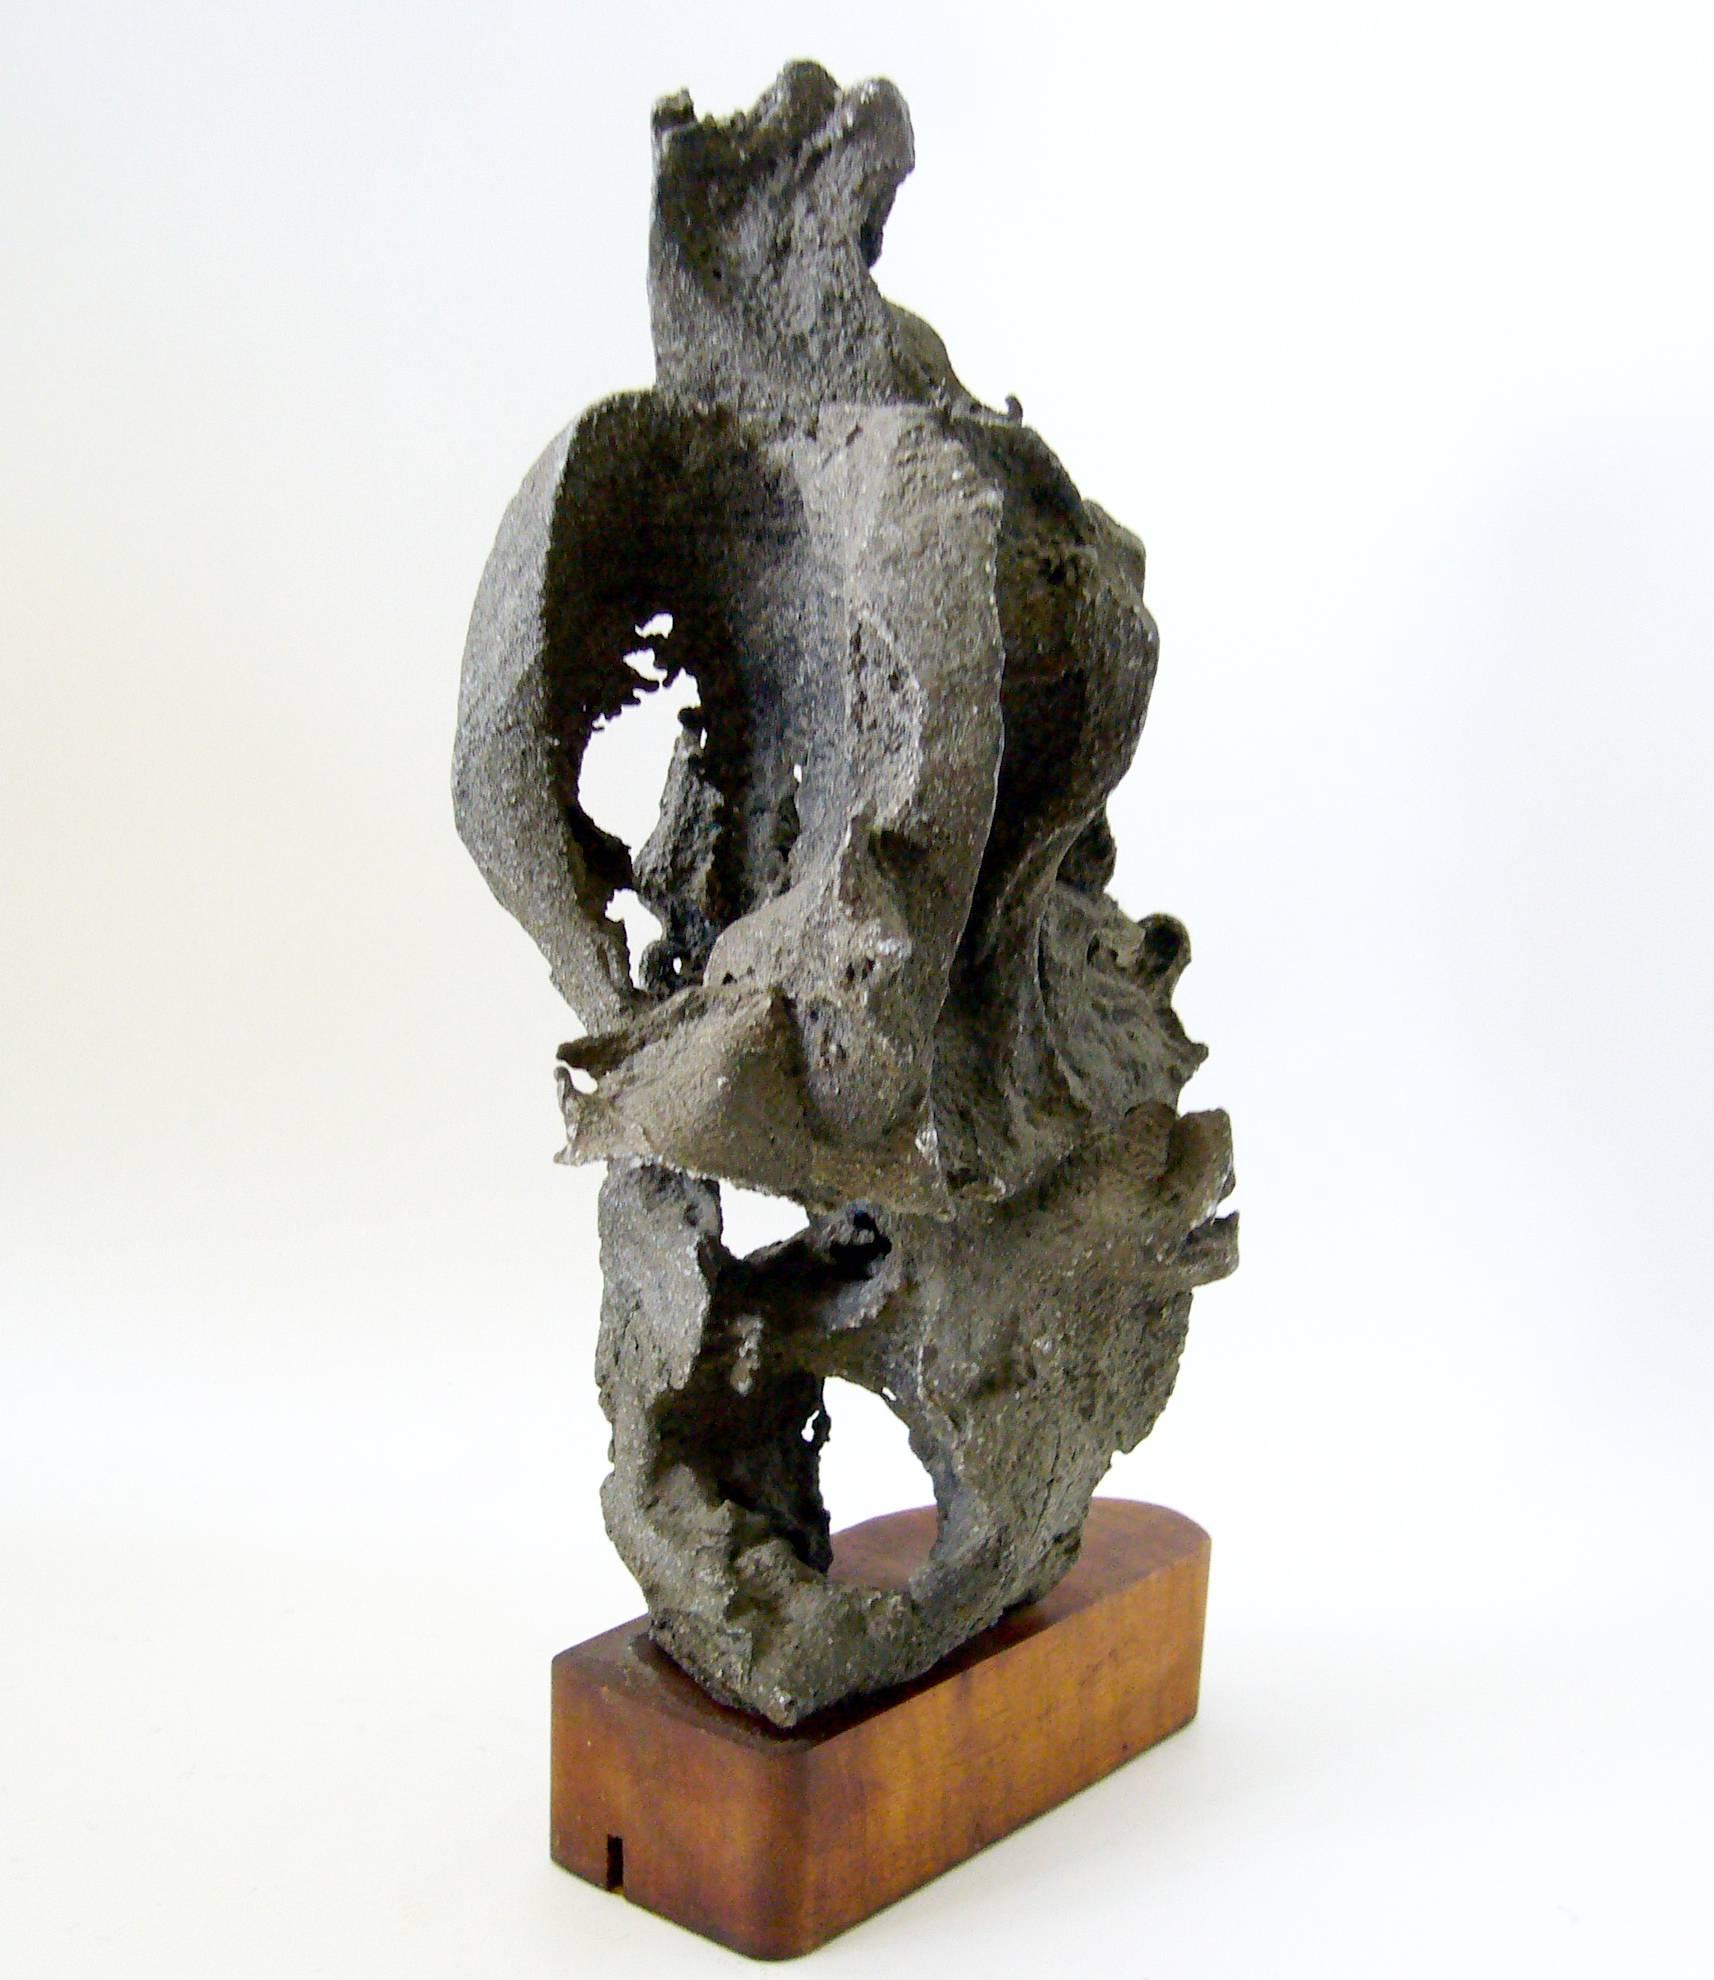 Abstract modernist aluminum sculpture on found wood base, circa 1960s. Sculpture measures 12" high by 7" wide by 5" deep and is unsigned. From the unknown artists' estate in Altadena, California. In very good vintage condition.